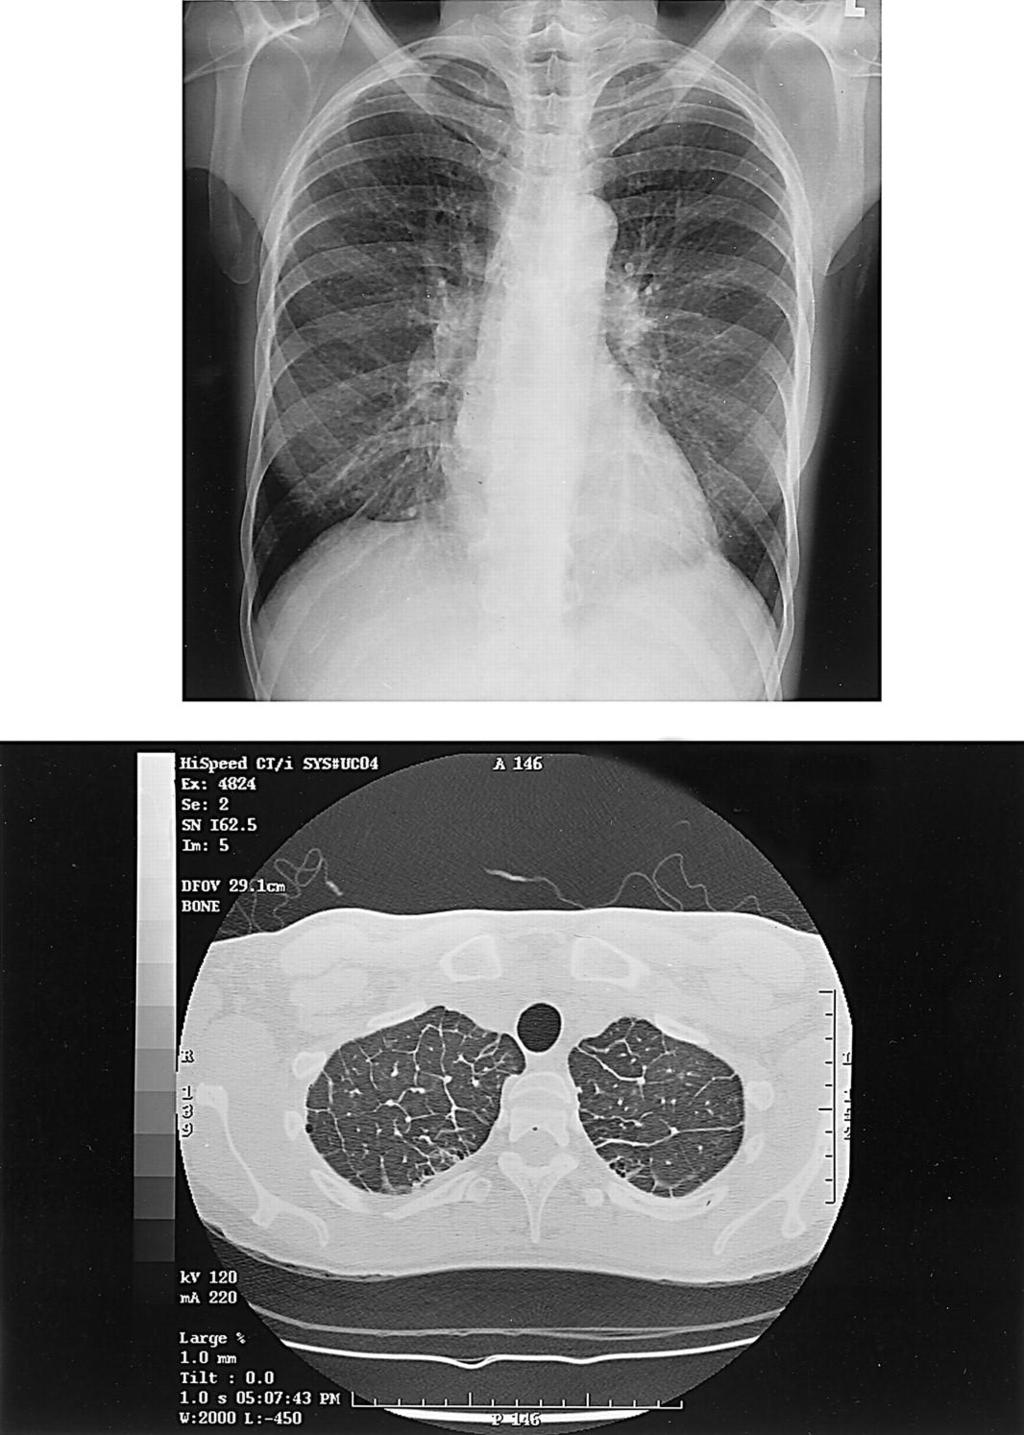 A chest radiograph of a 50-year-old woman with